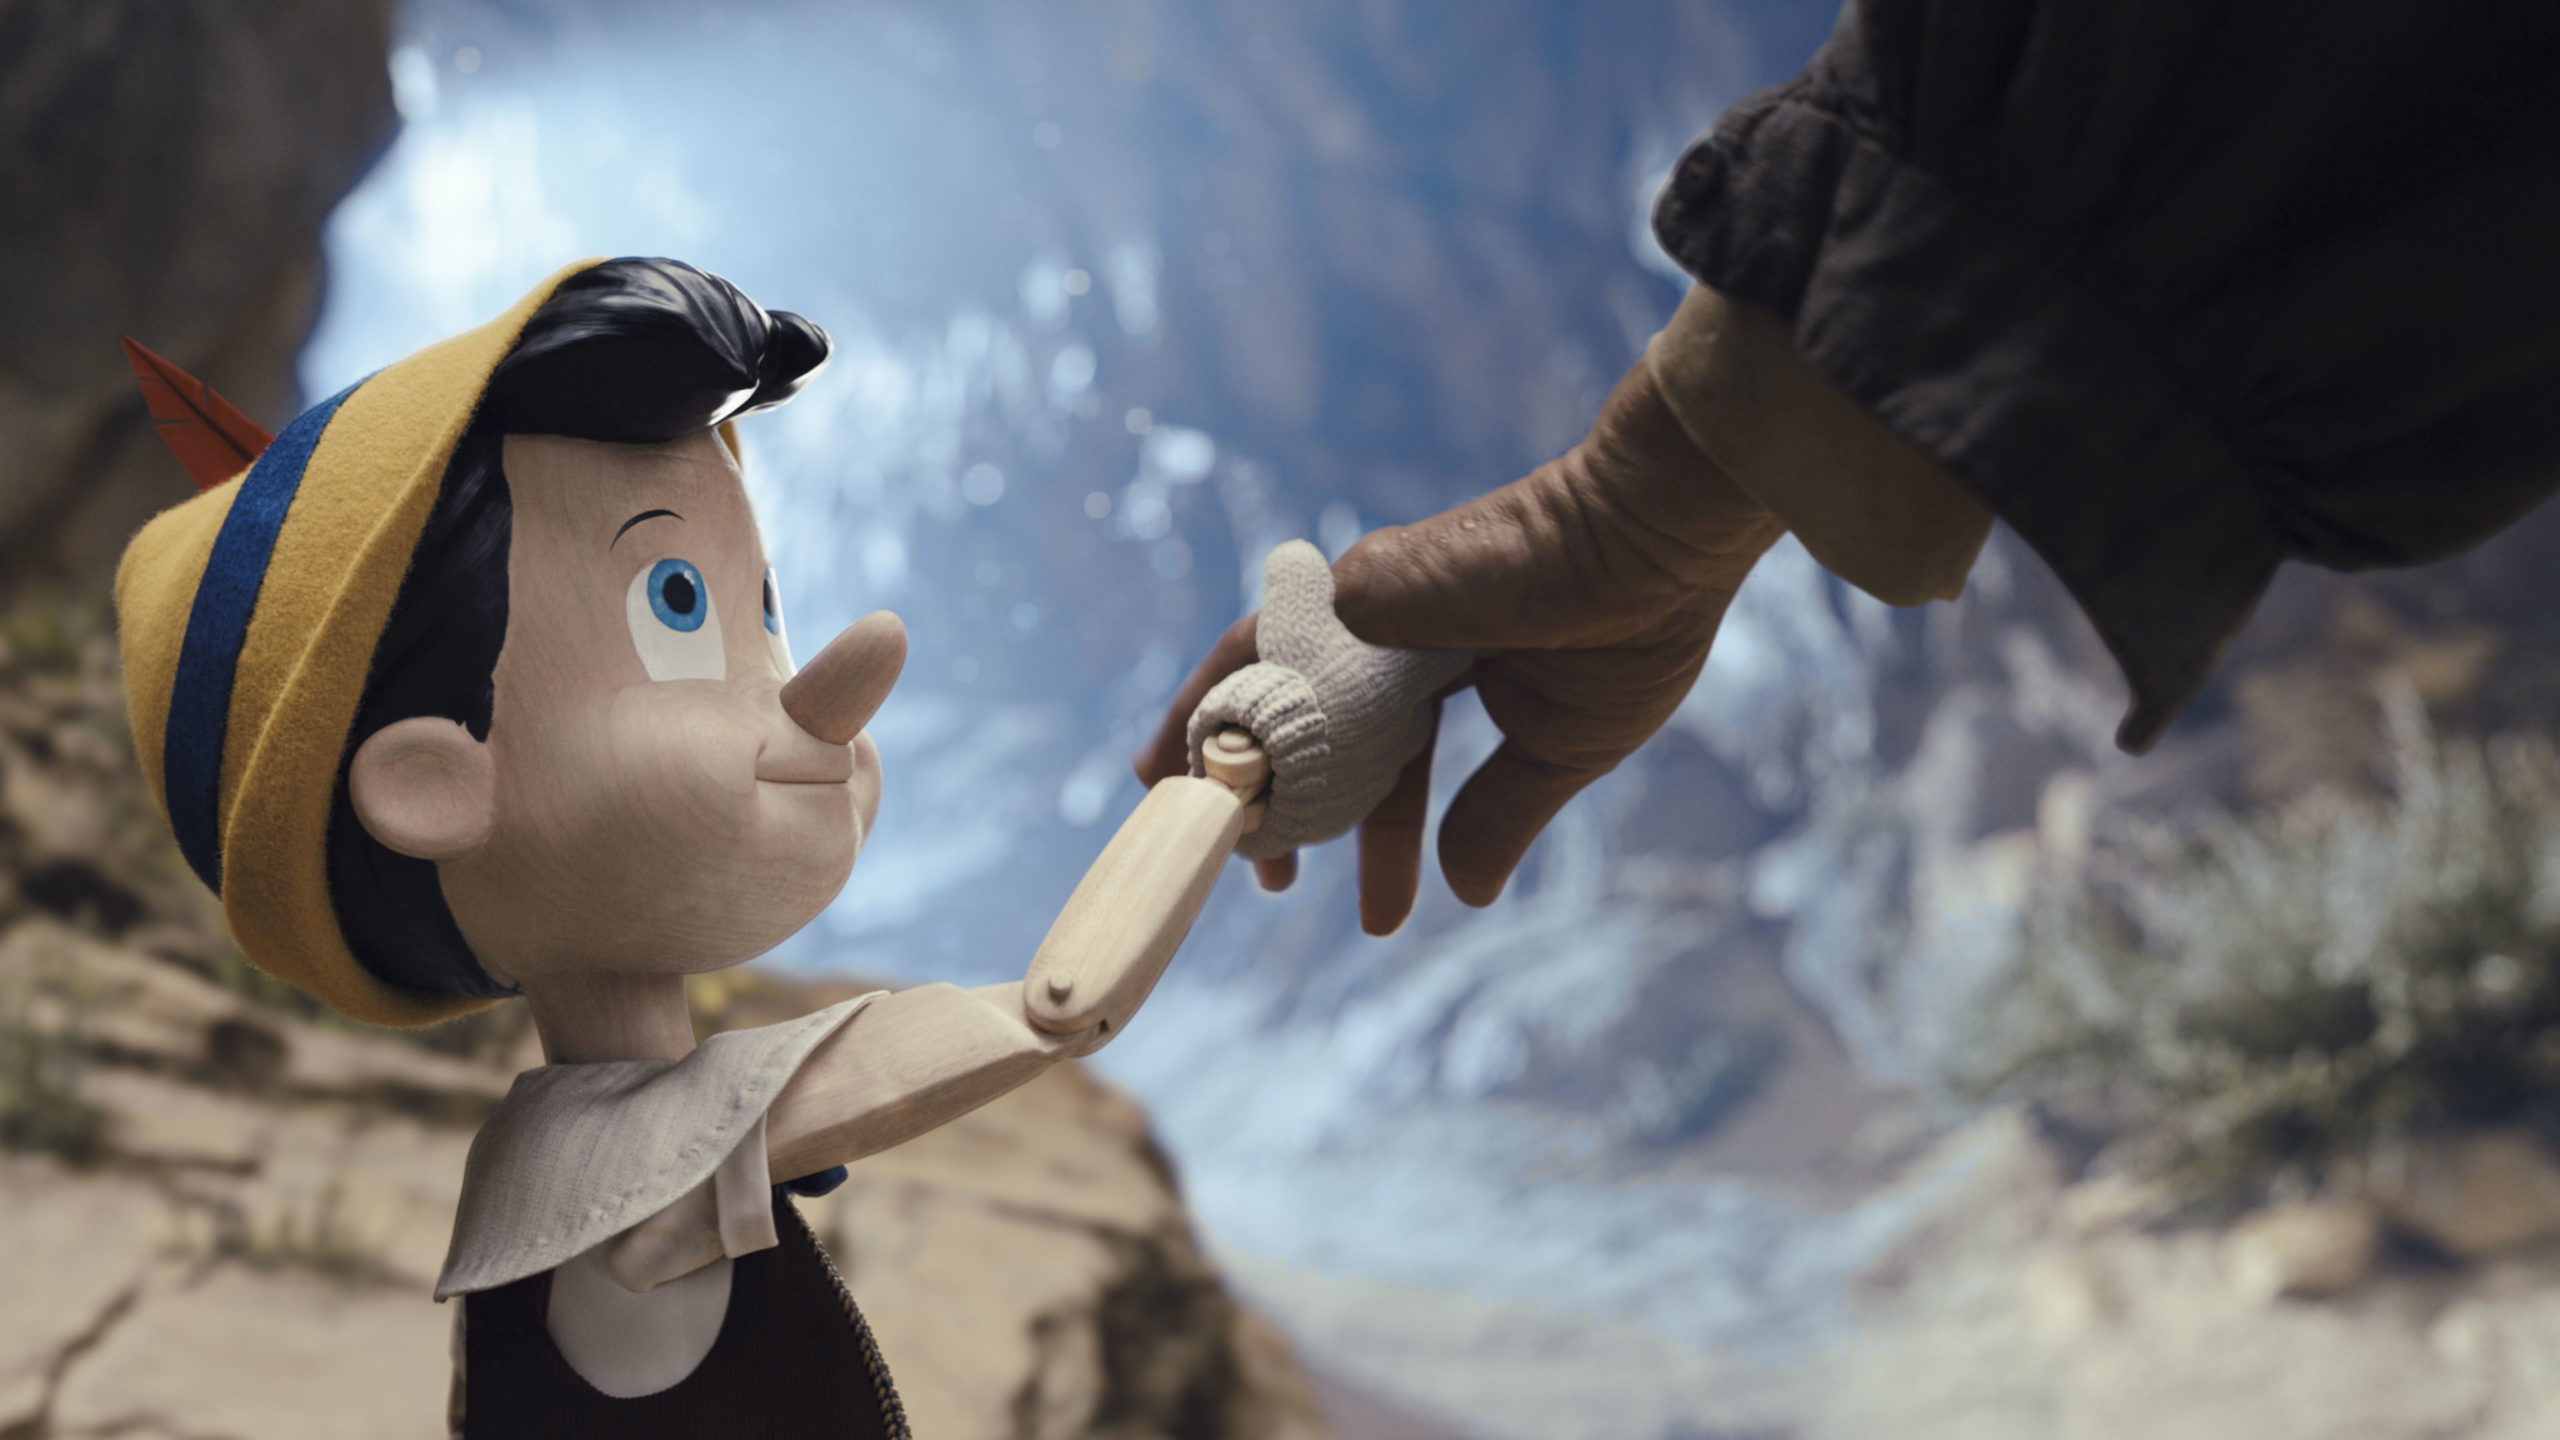 Pinocchio (voiced by Benjamin Evan Ainsworth) in Disney's live-action PINOCCHIO, exclusively on Dis...